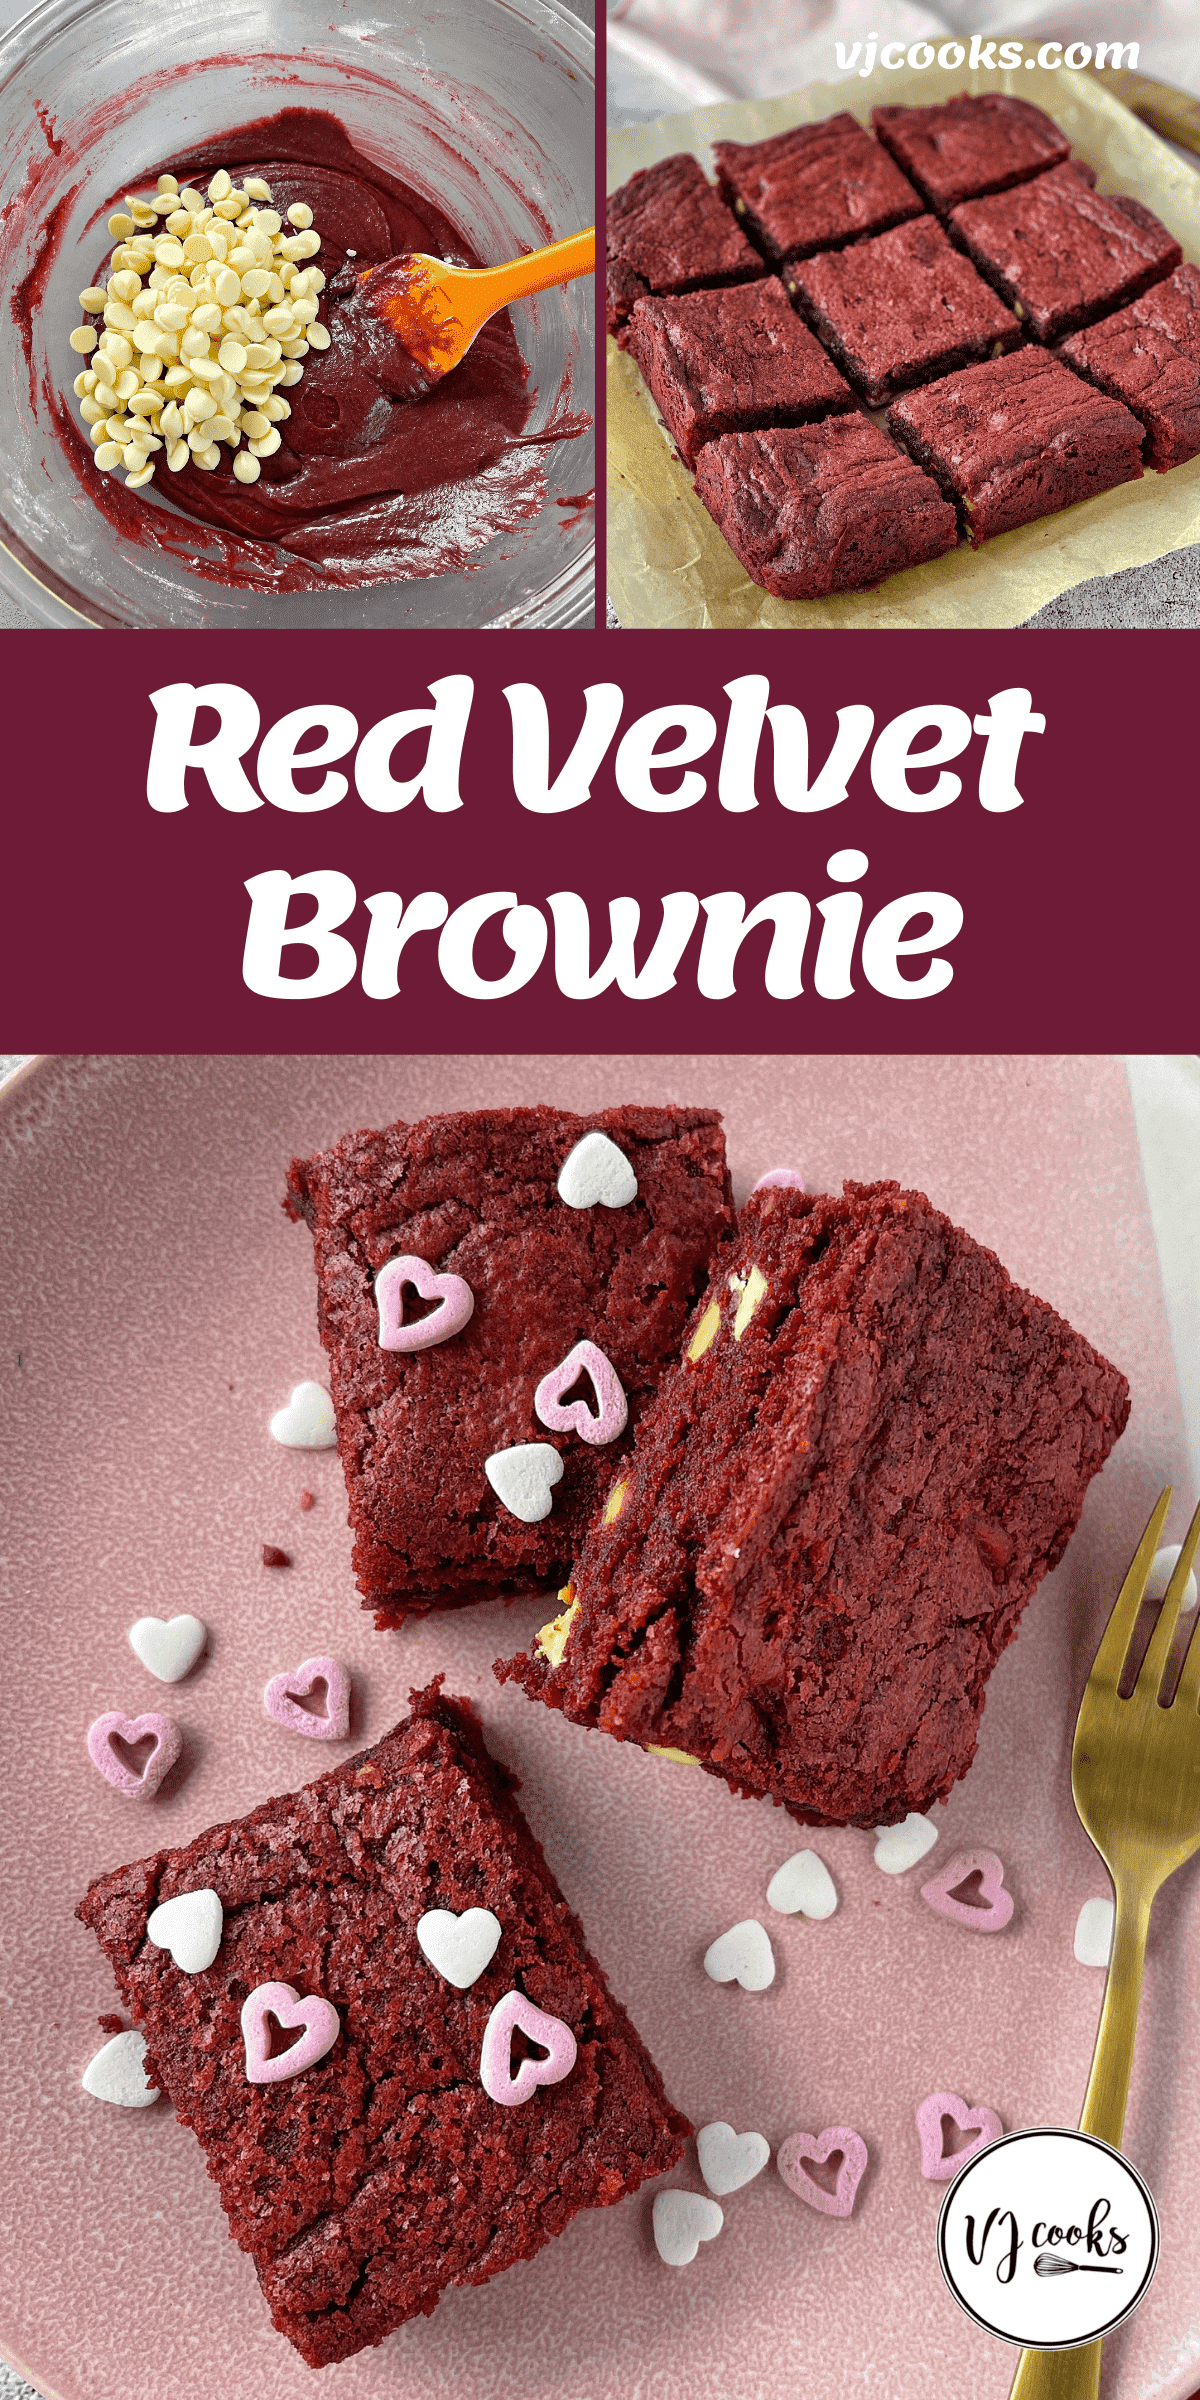 The process of making Red Velvet Brownie